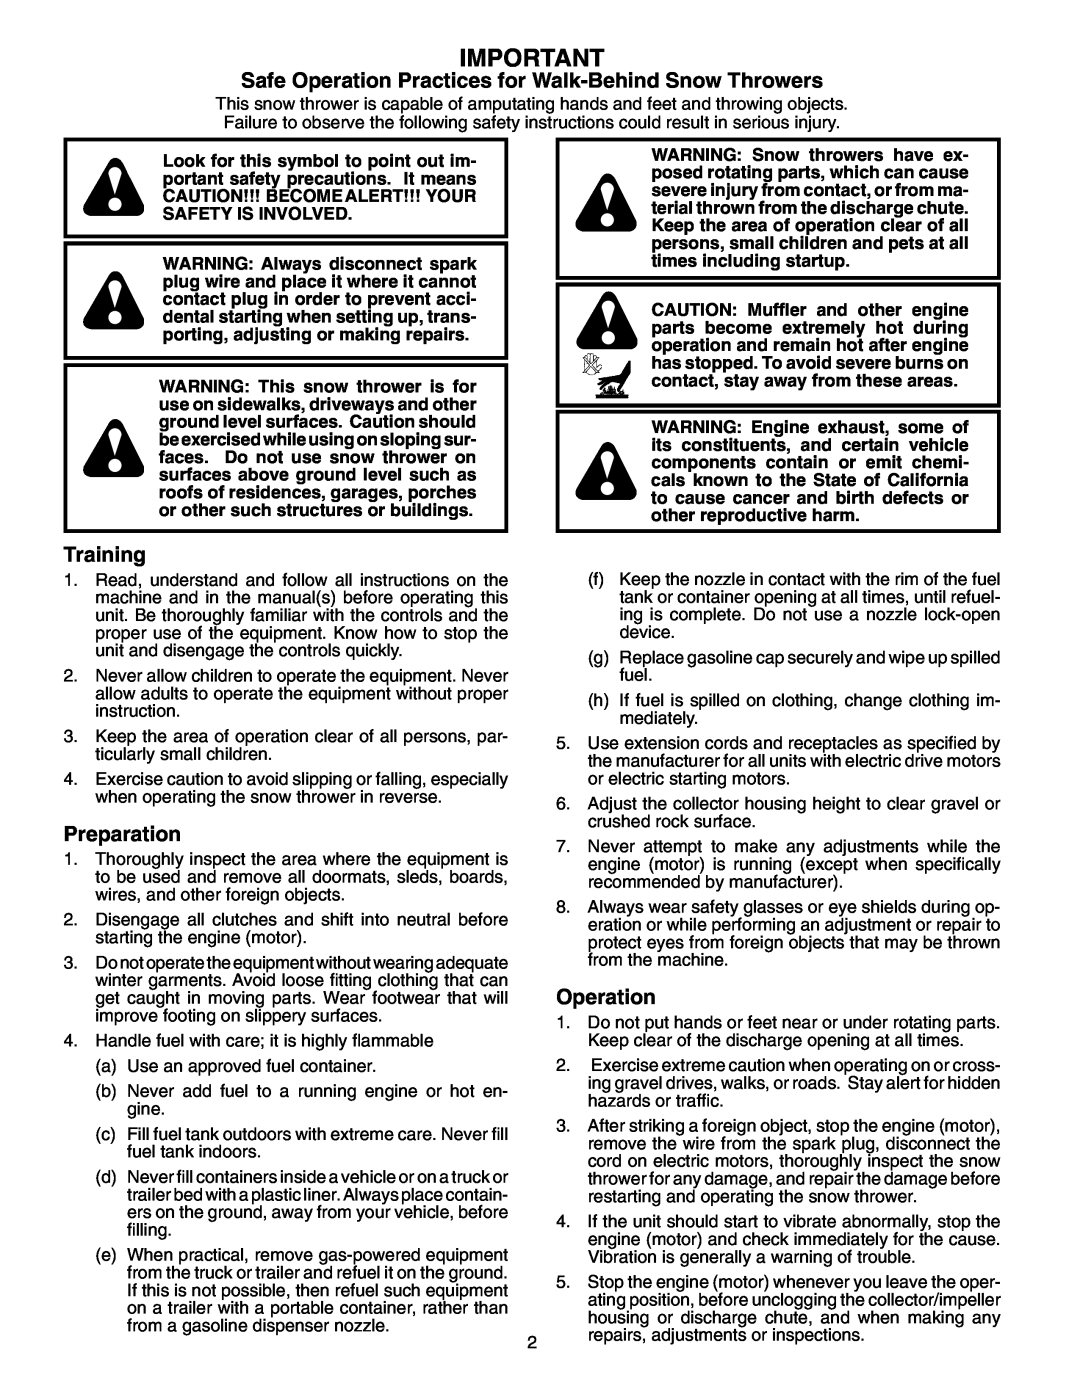 Poulan 199434 owner manual Safe Operation Practices for Walk-Behind Snow Throwers, Training, Preparation 